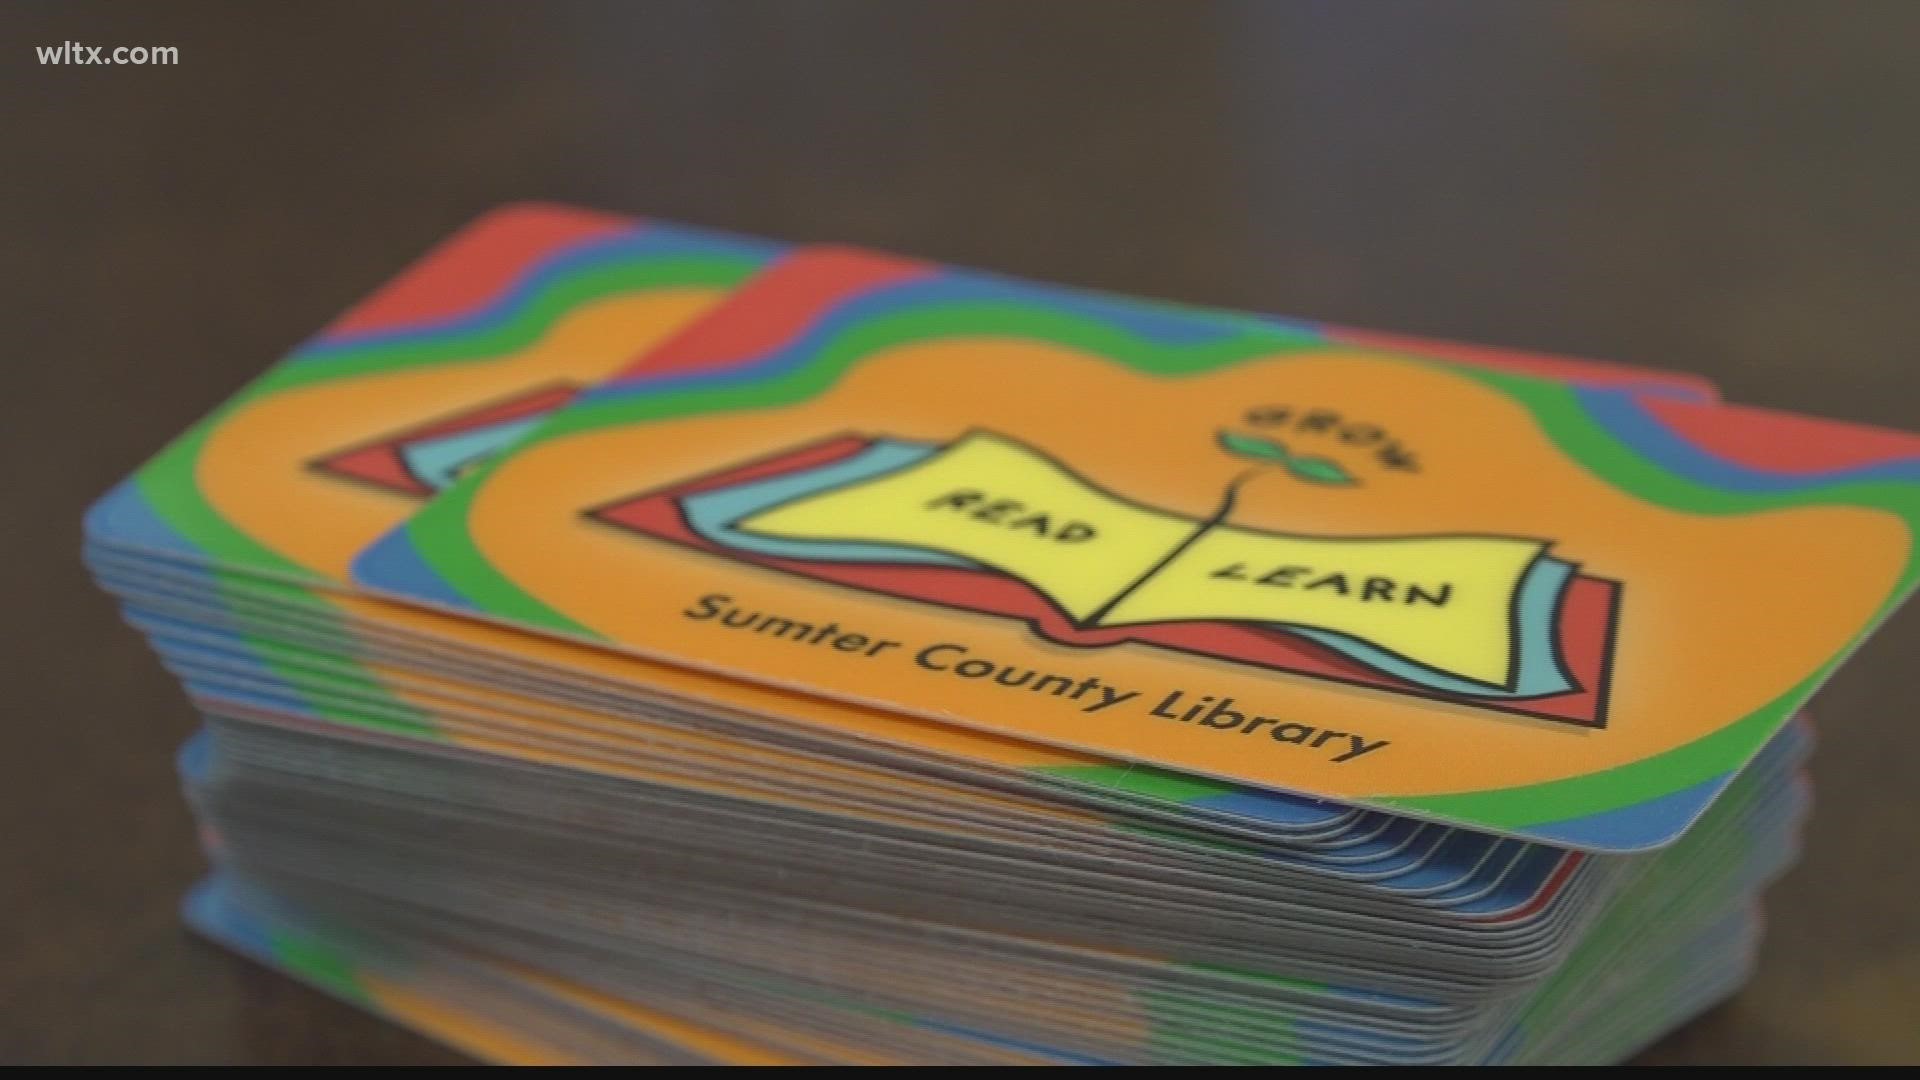 The cards, designed by a Sumter native, are designed to help kids get excited about reading.